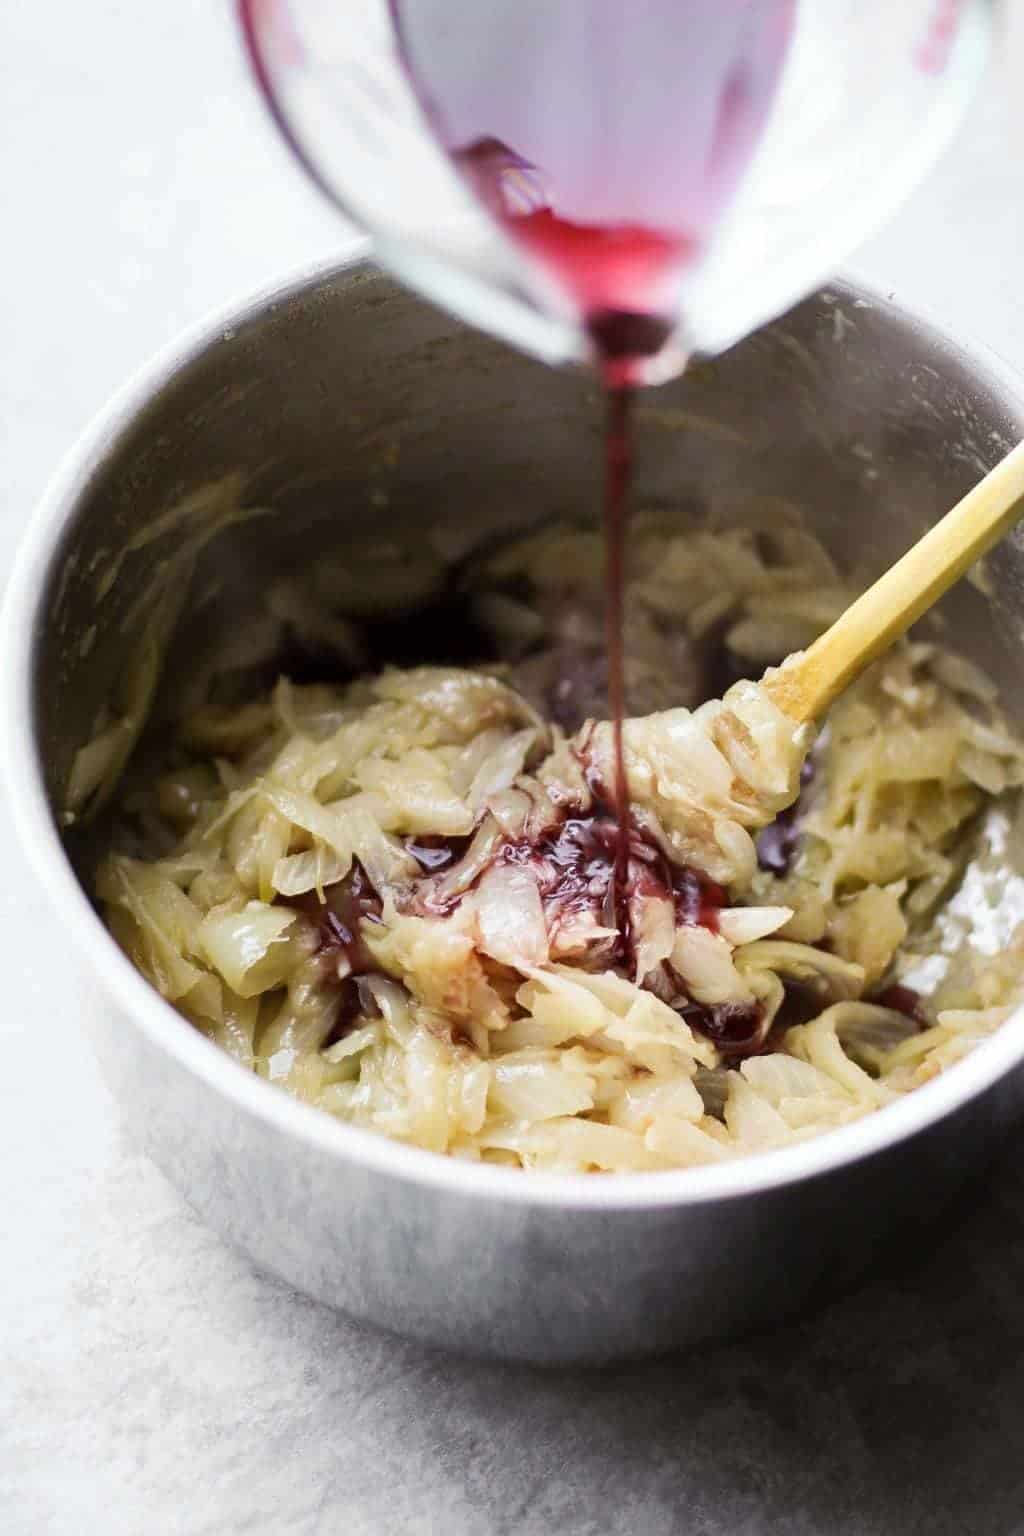 wine poured on caramelized onions